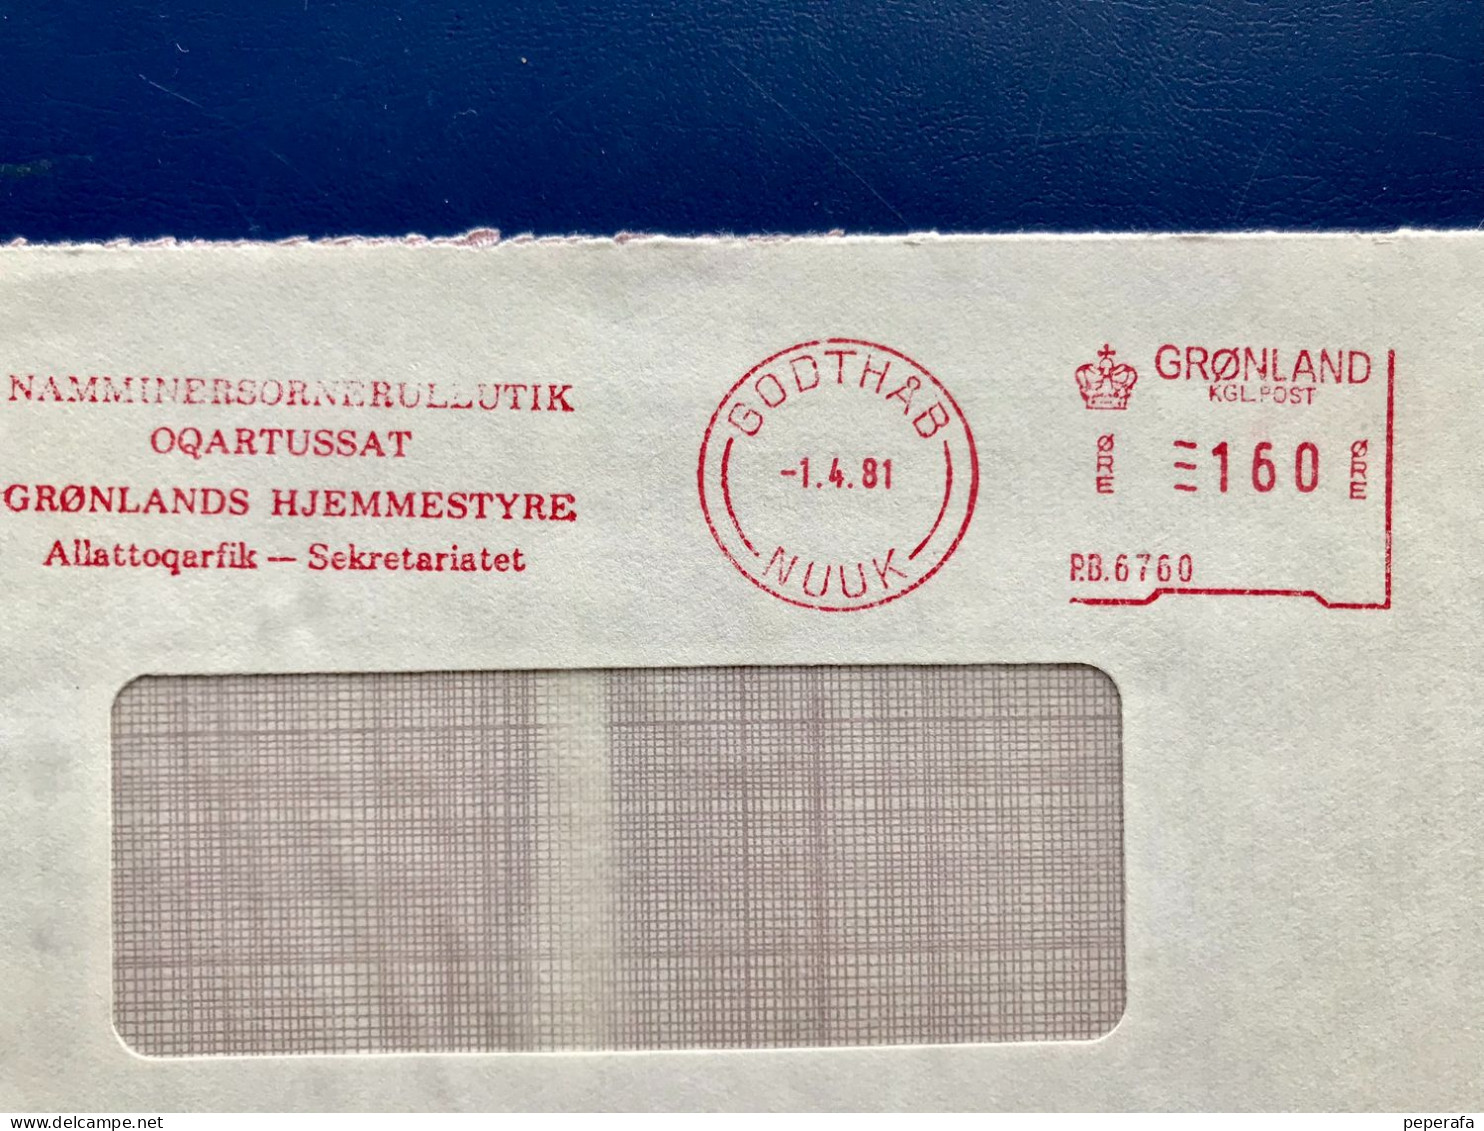 Denmark, Greenland GRØNLAND, 2 COVER POSTAGE METER, FRANQUEO MECÁNICO (FRANCOFILIA 2) - Marcophilie